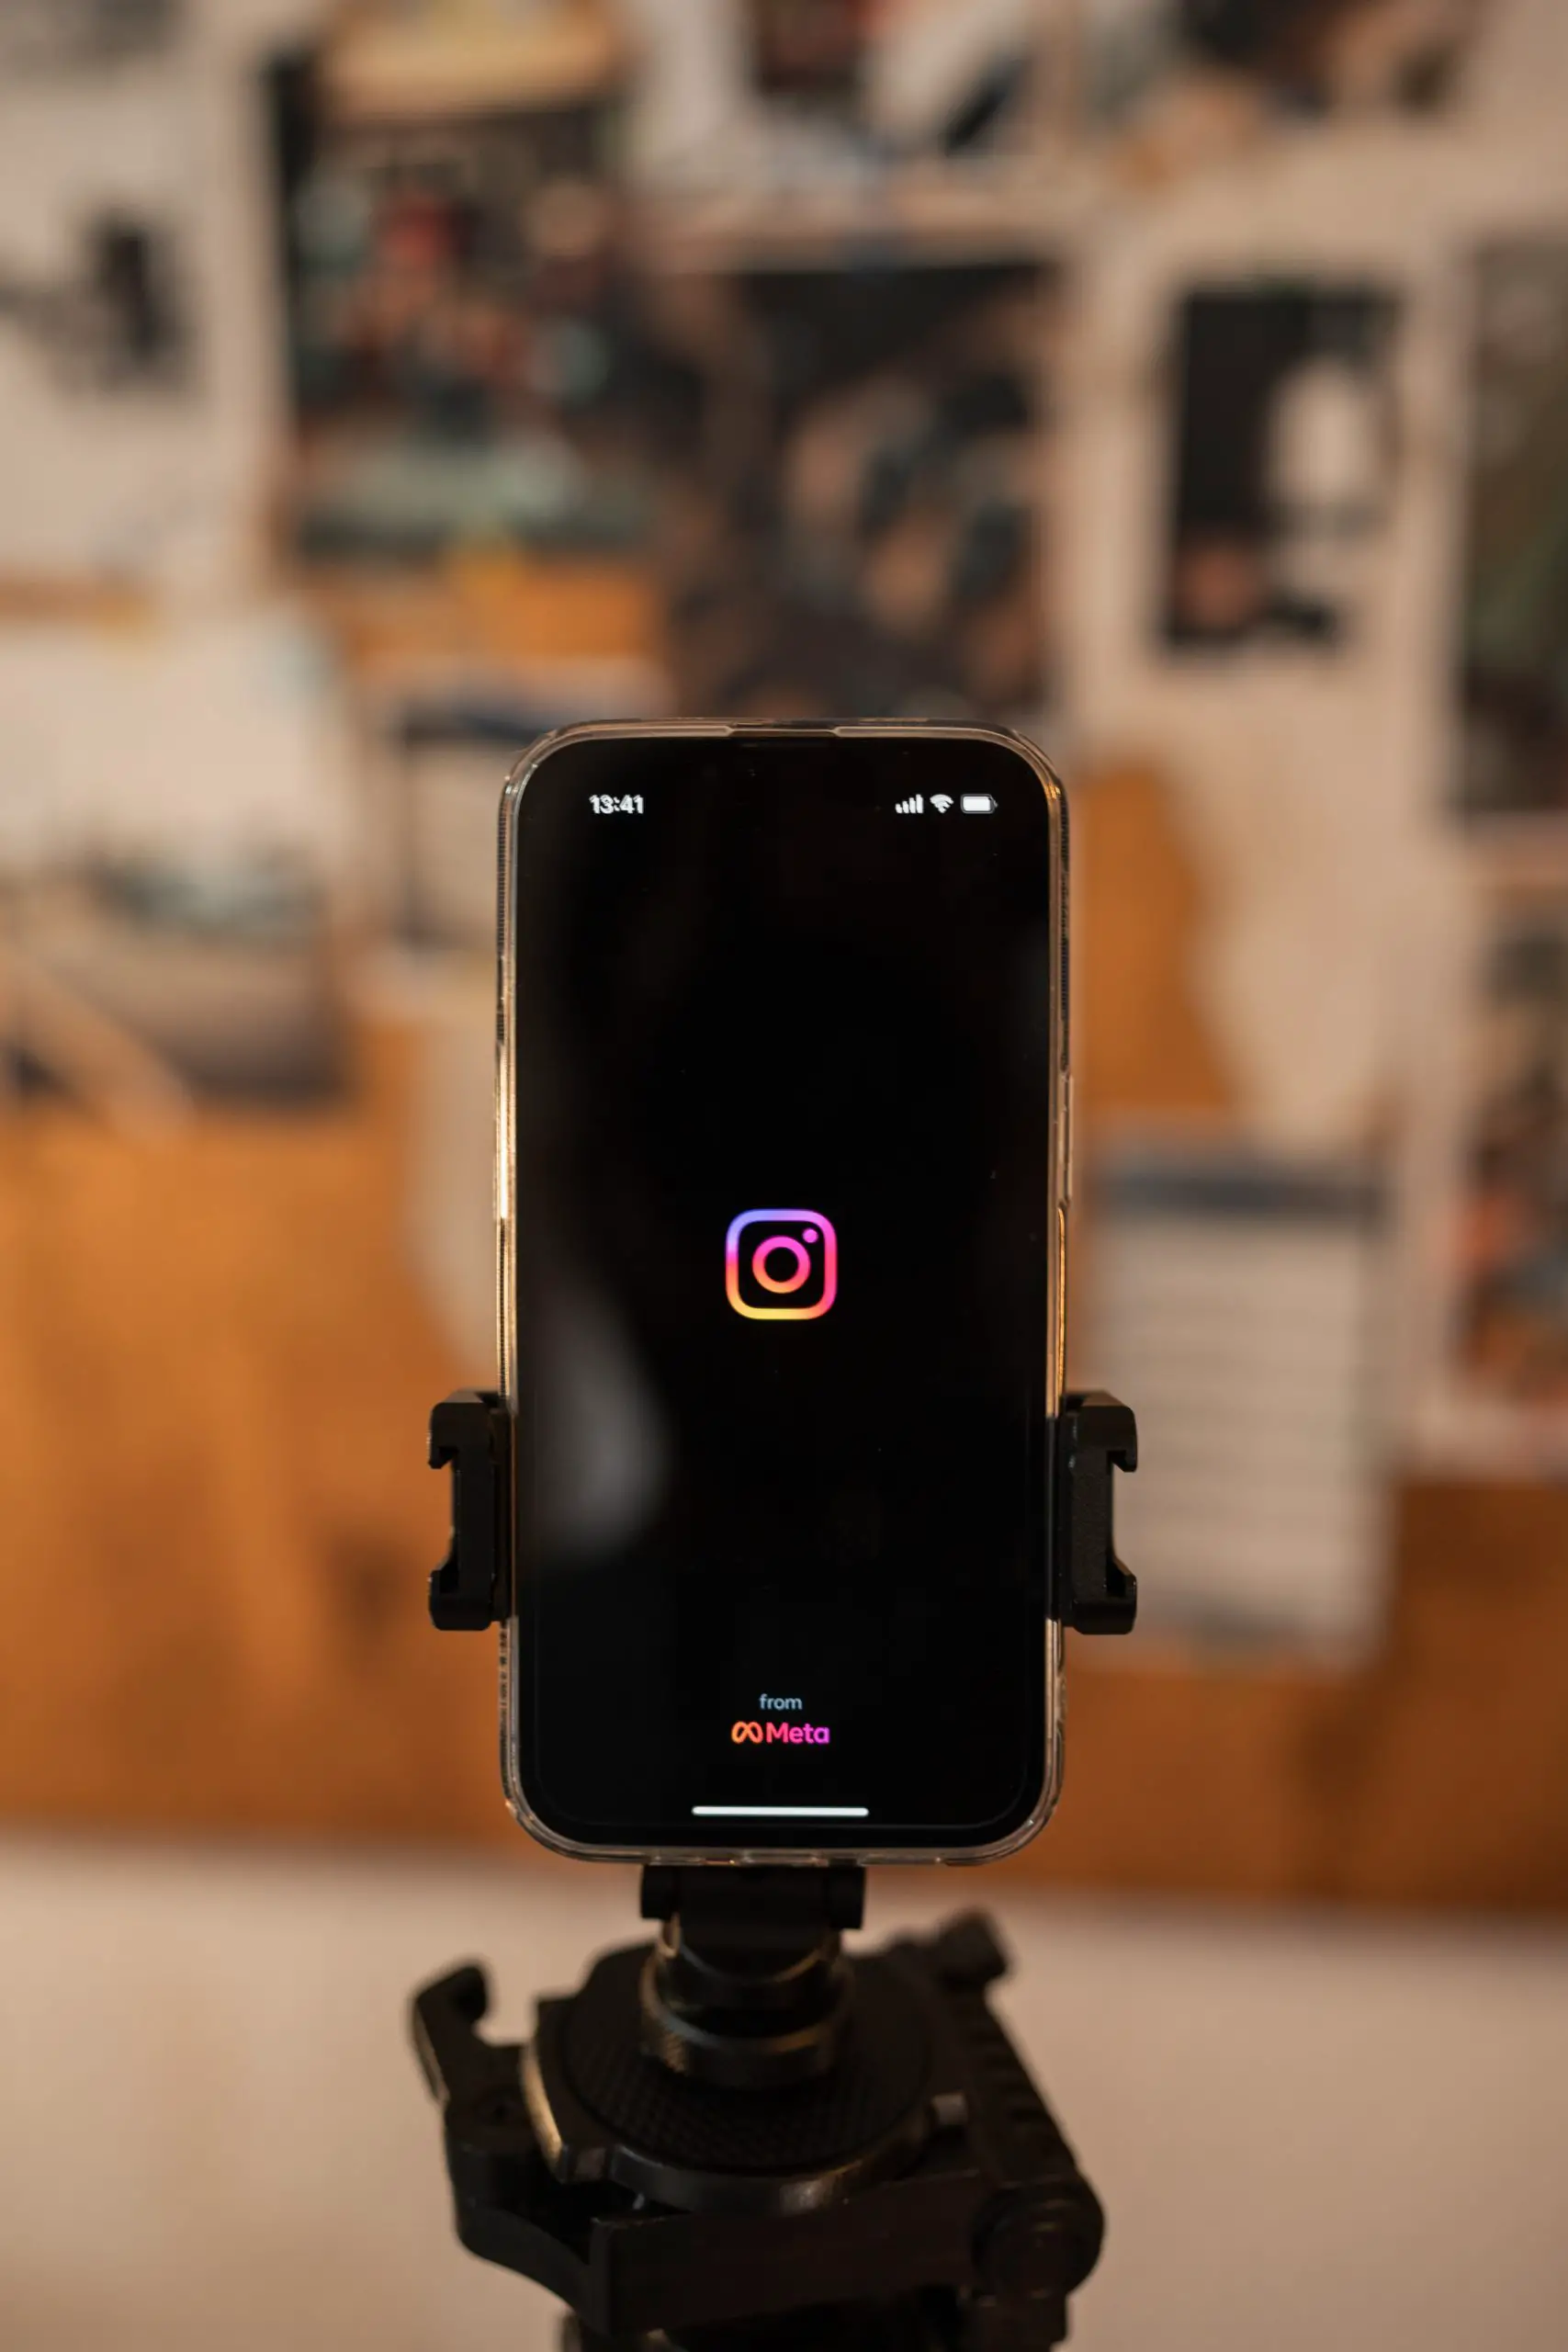 instagram followers phone on stand